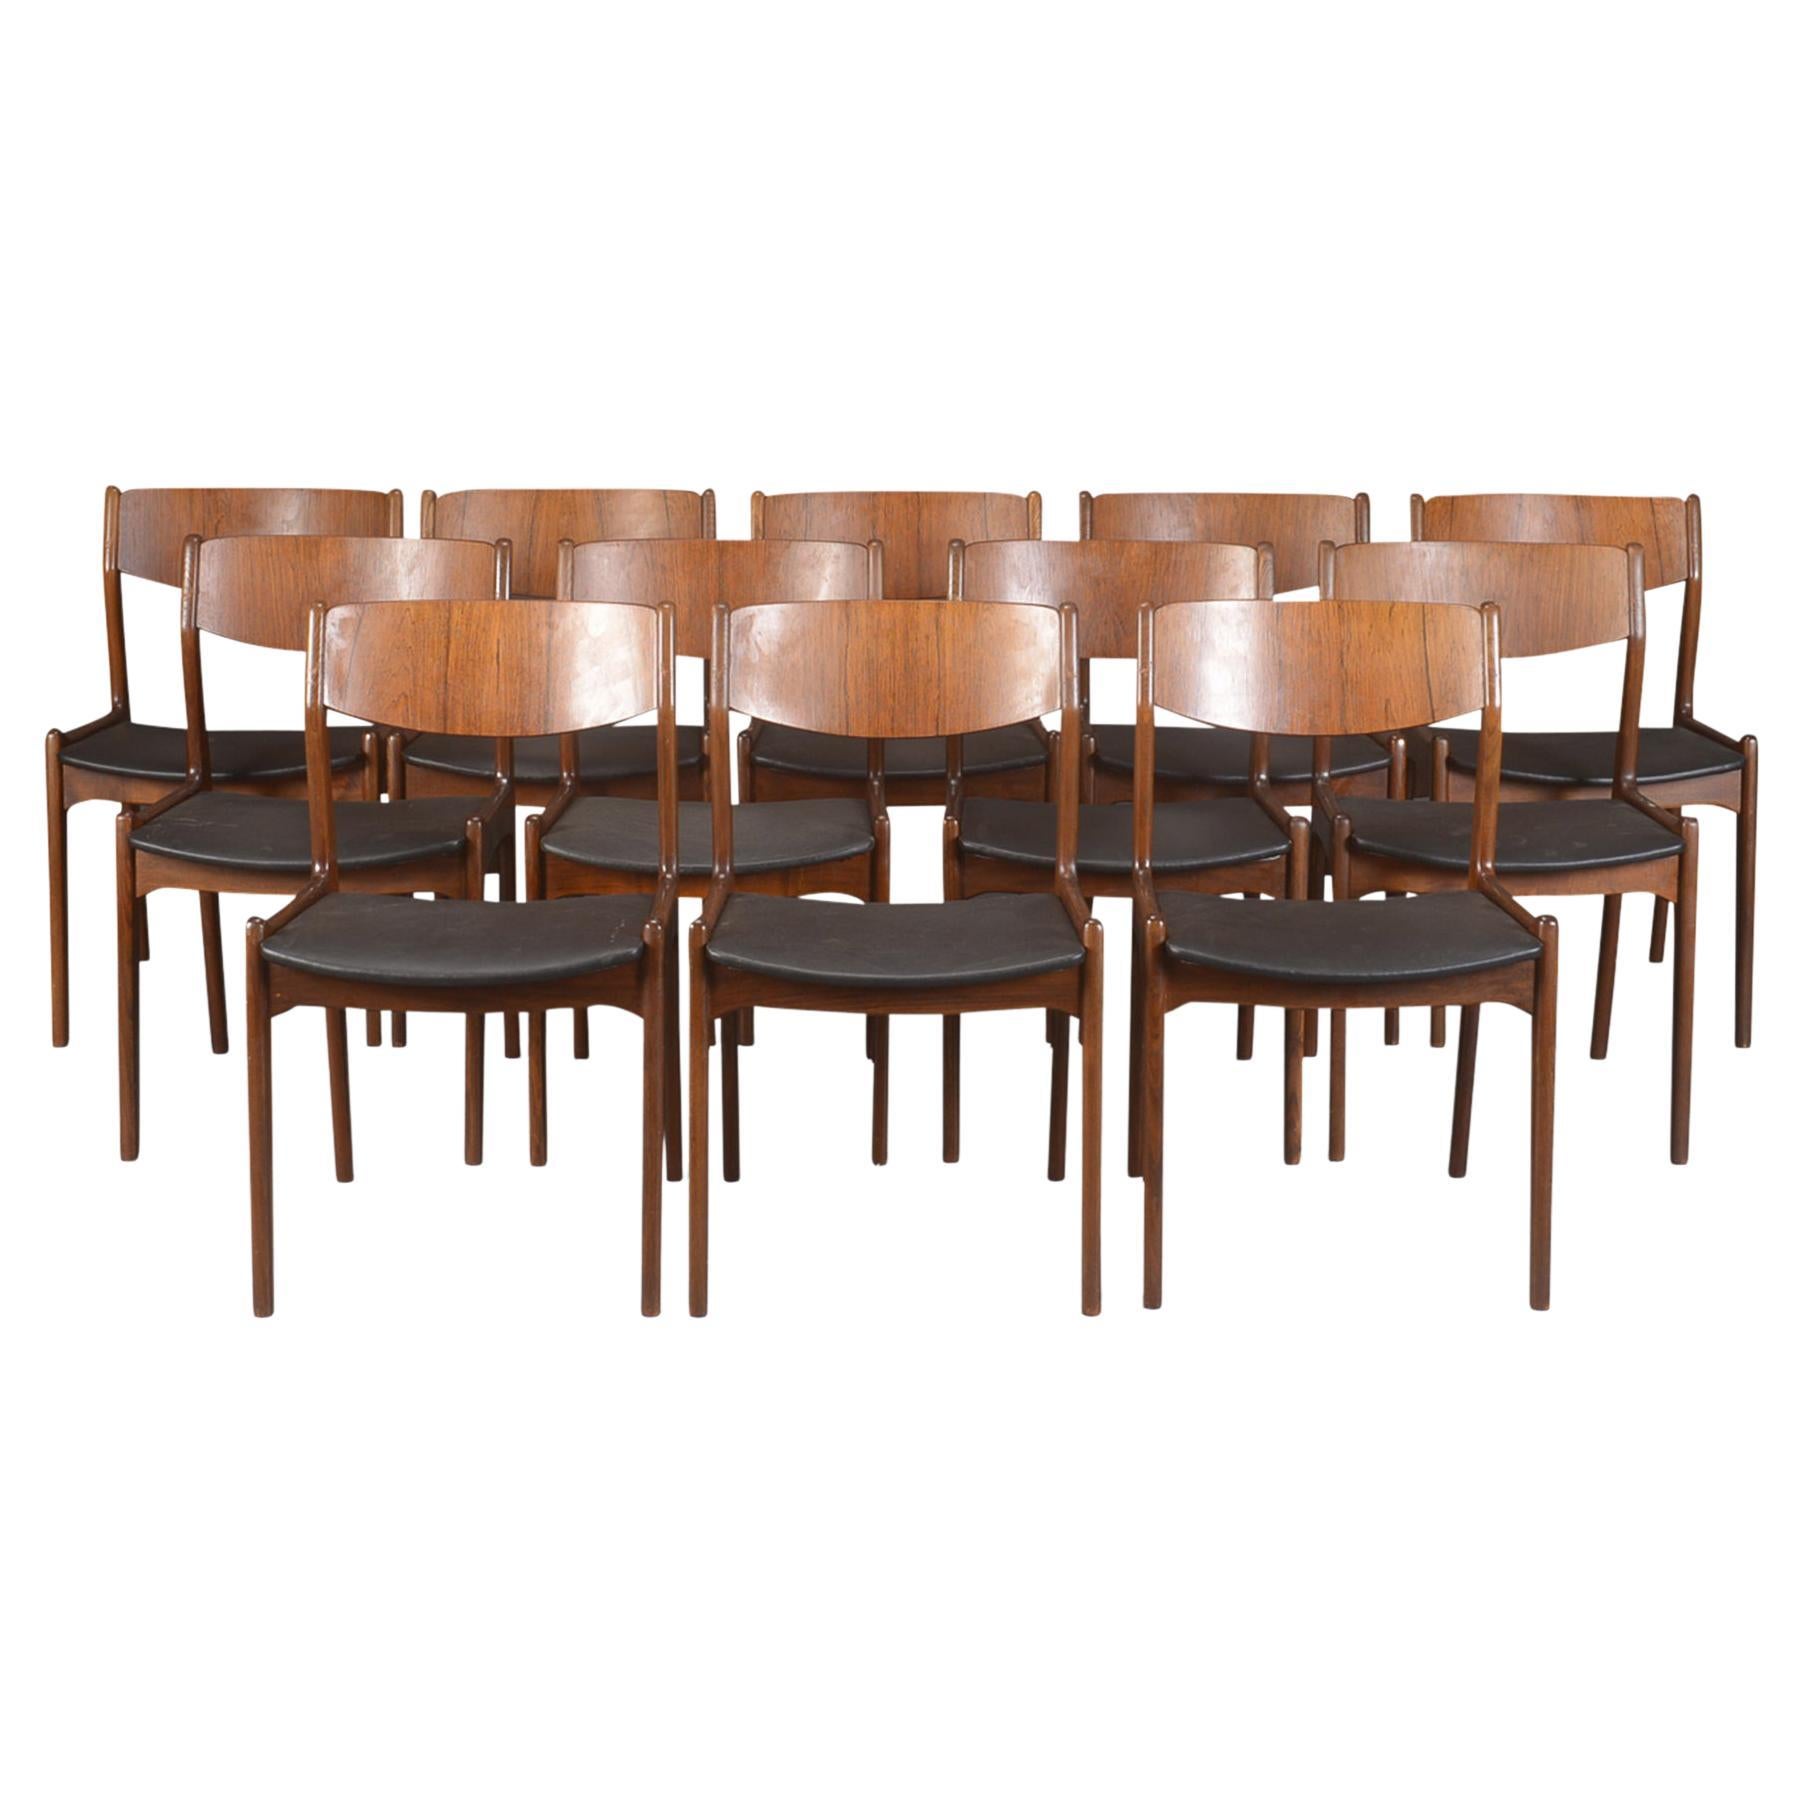 Set of Twelve Rosewood Dining Chairs by P.E. Jorgensen